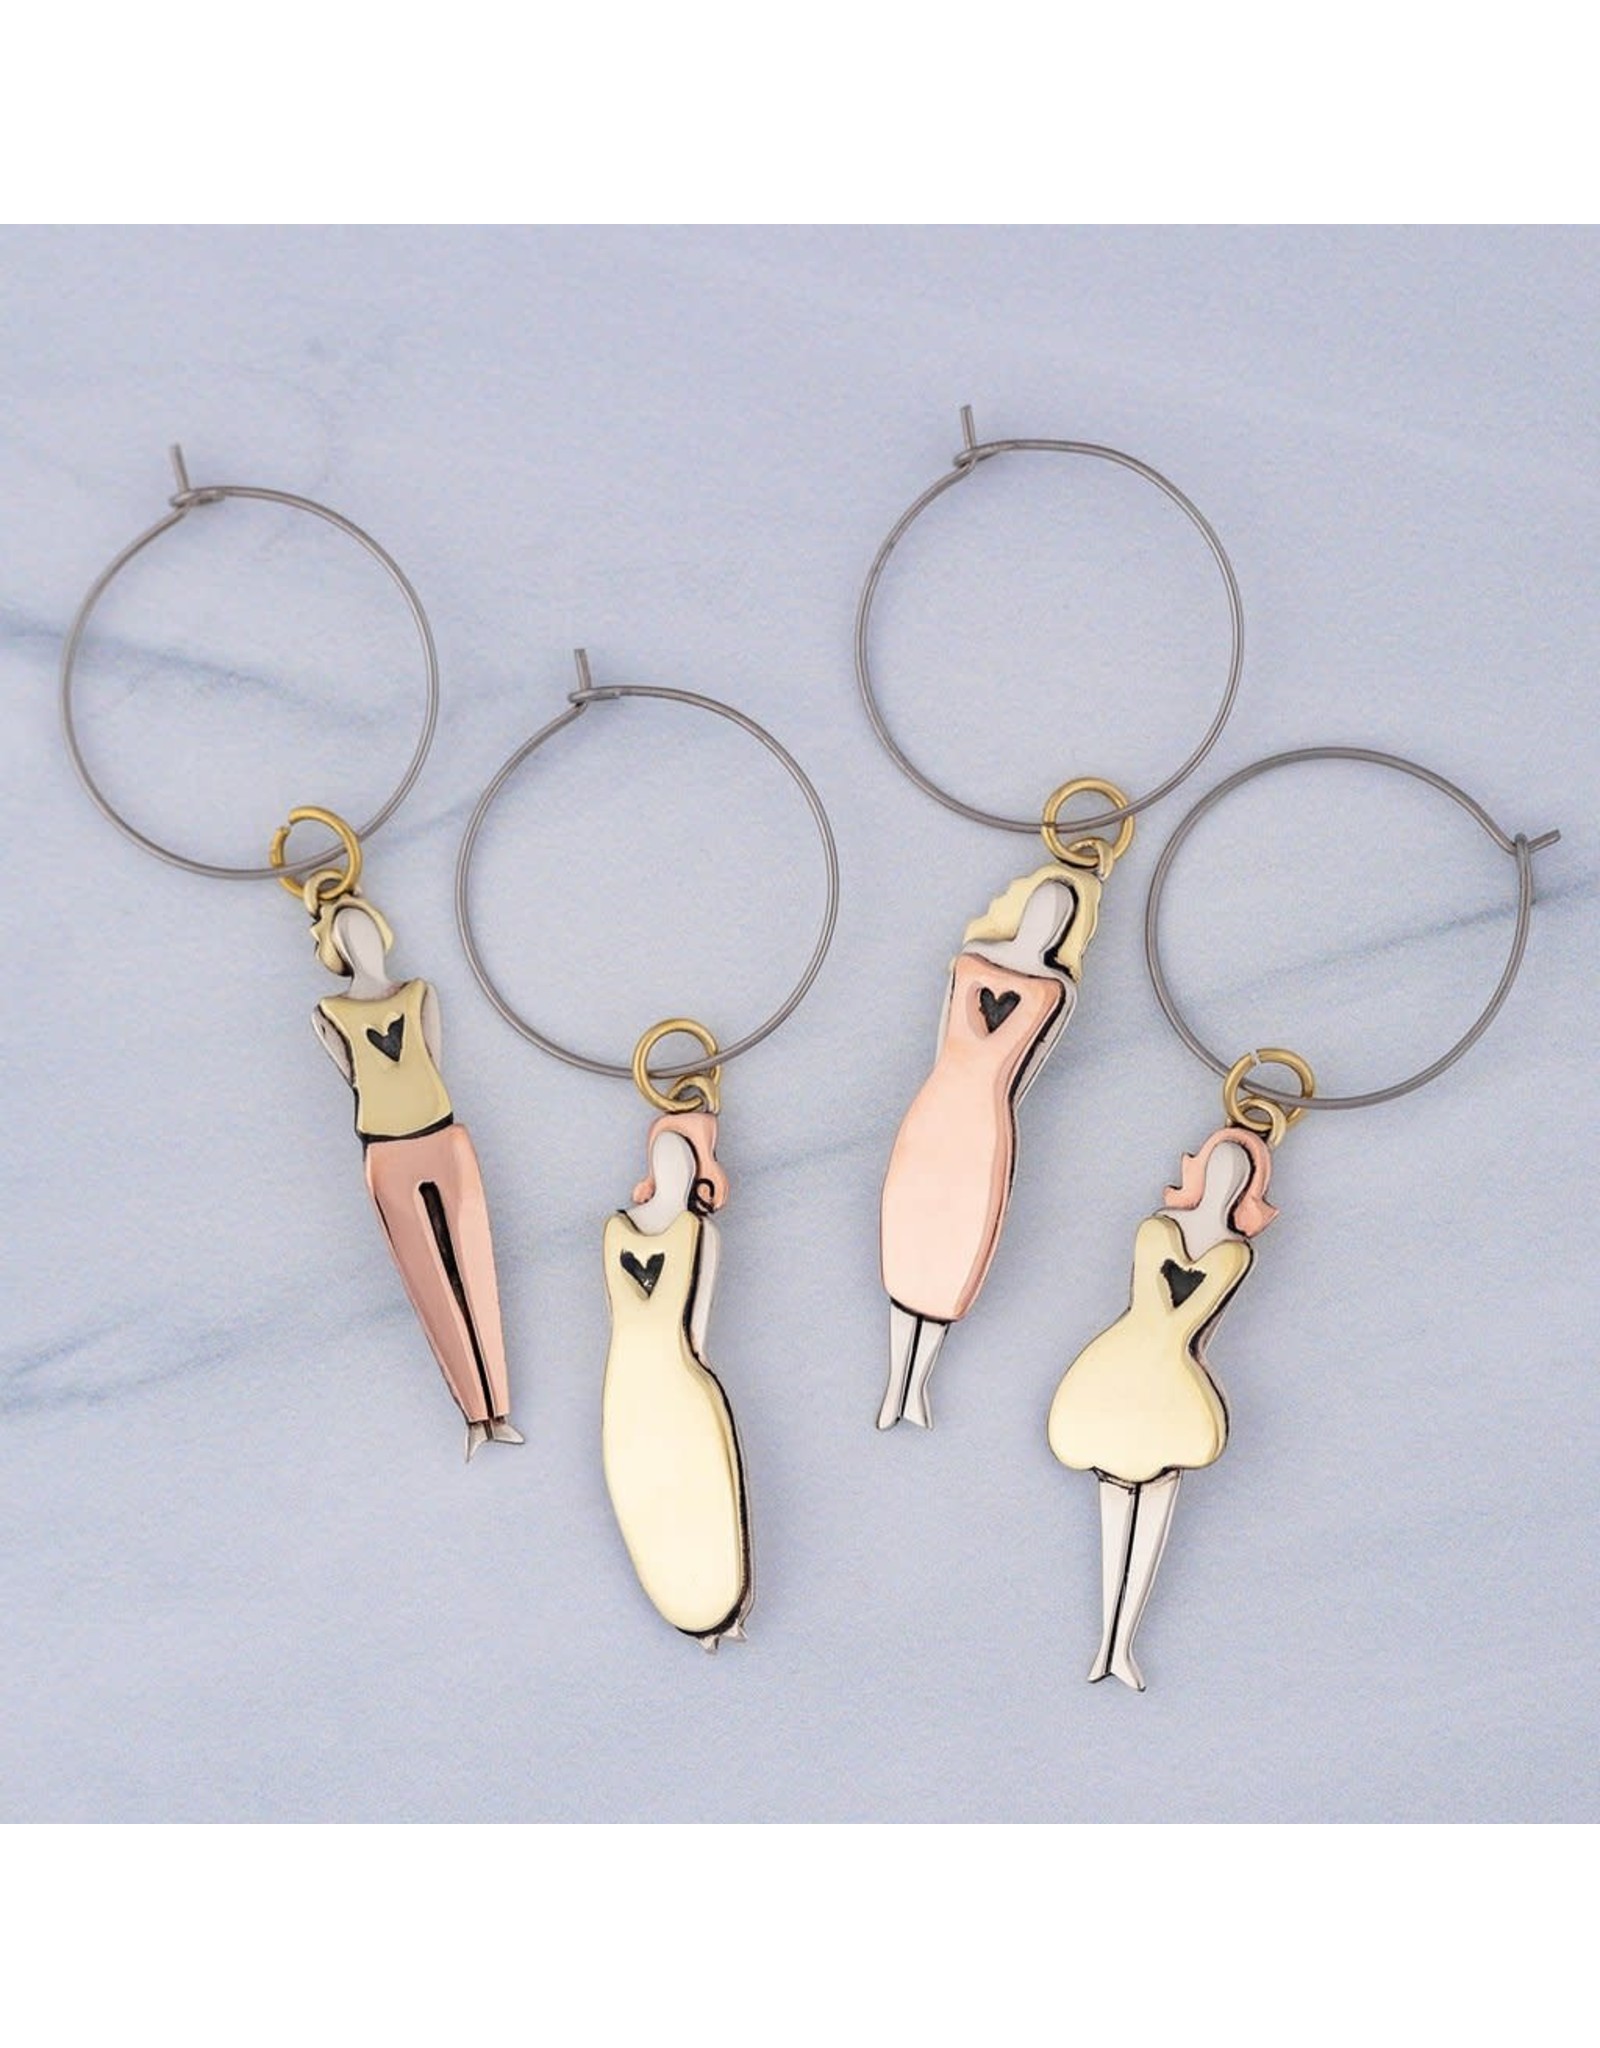 Trade roots Four Friends/Sisters Wine Charms